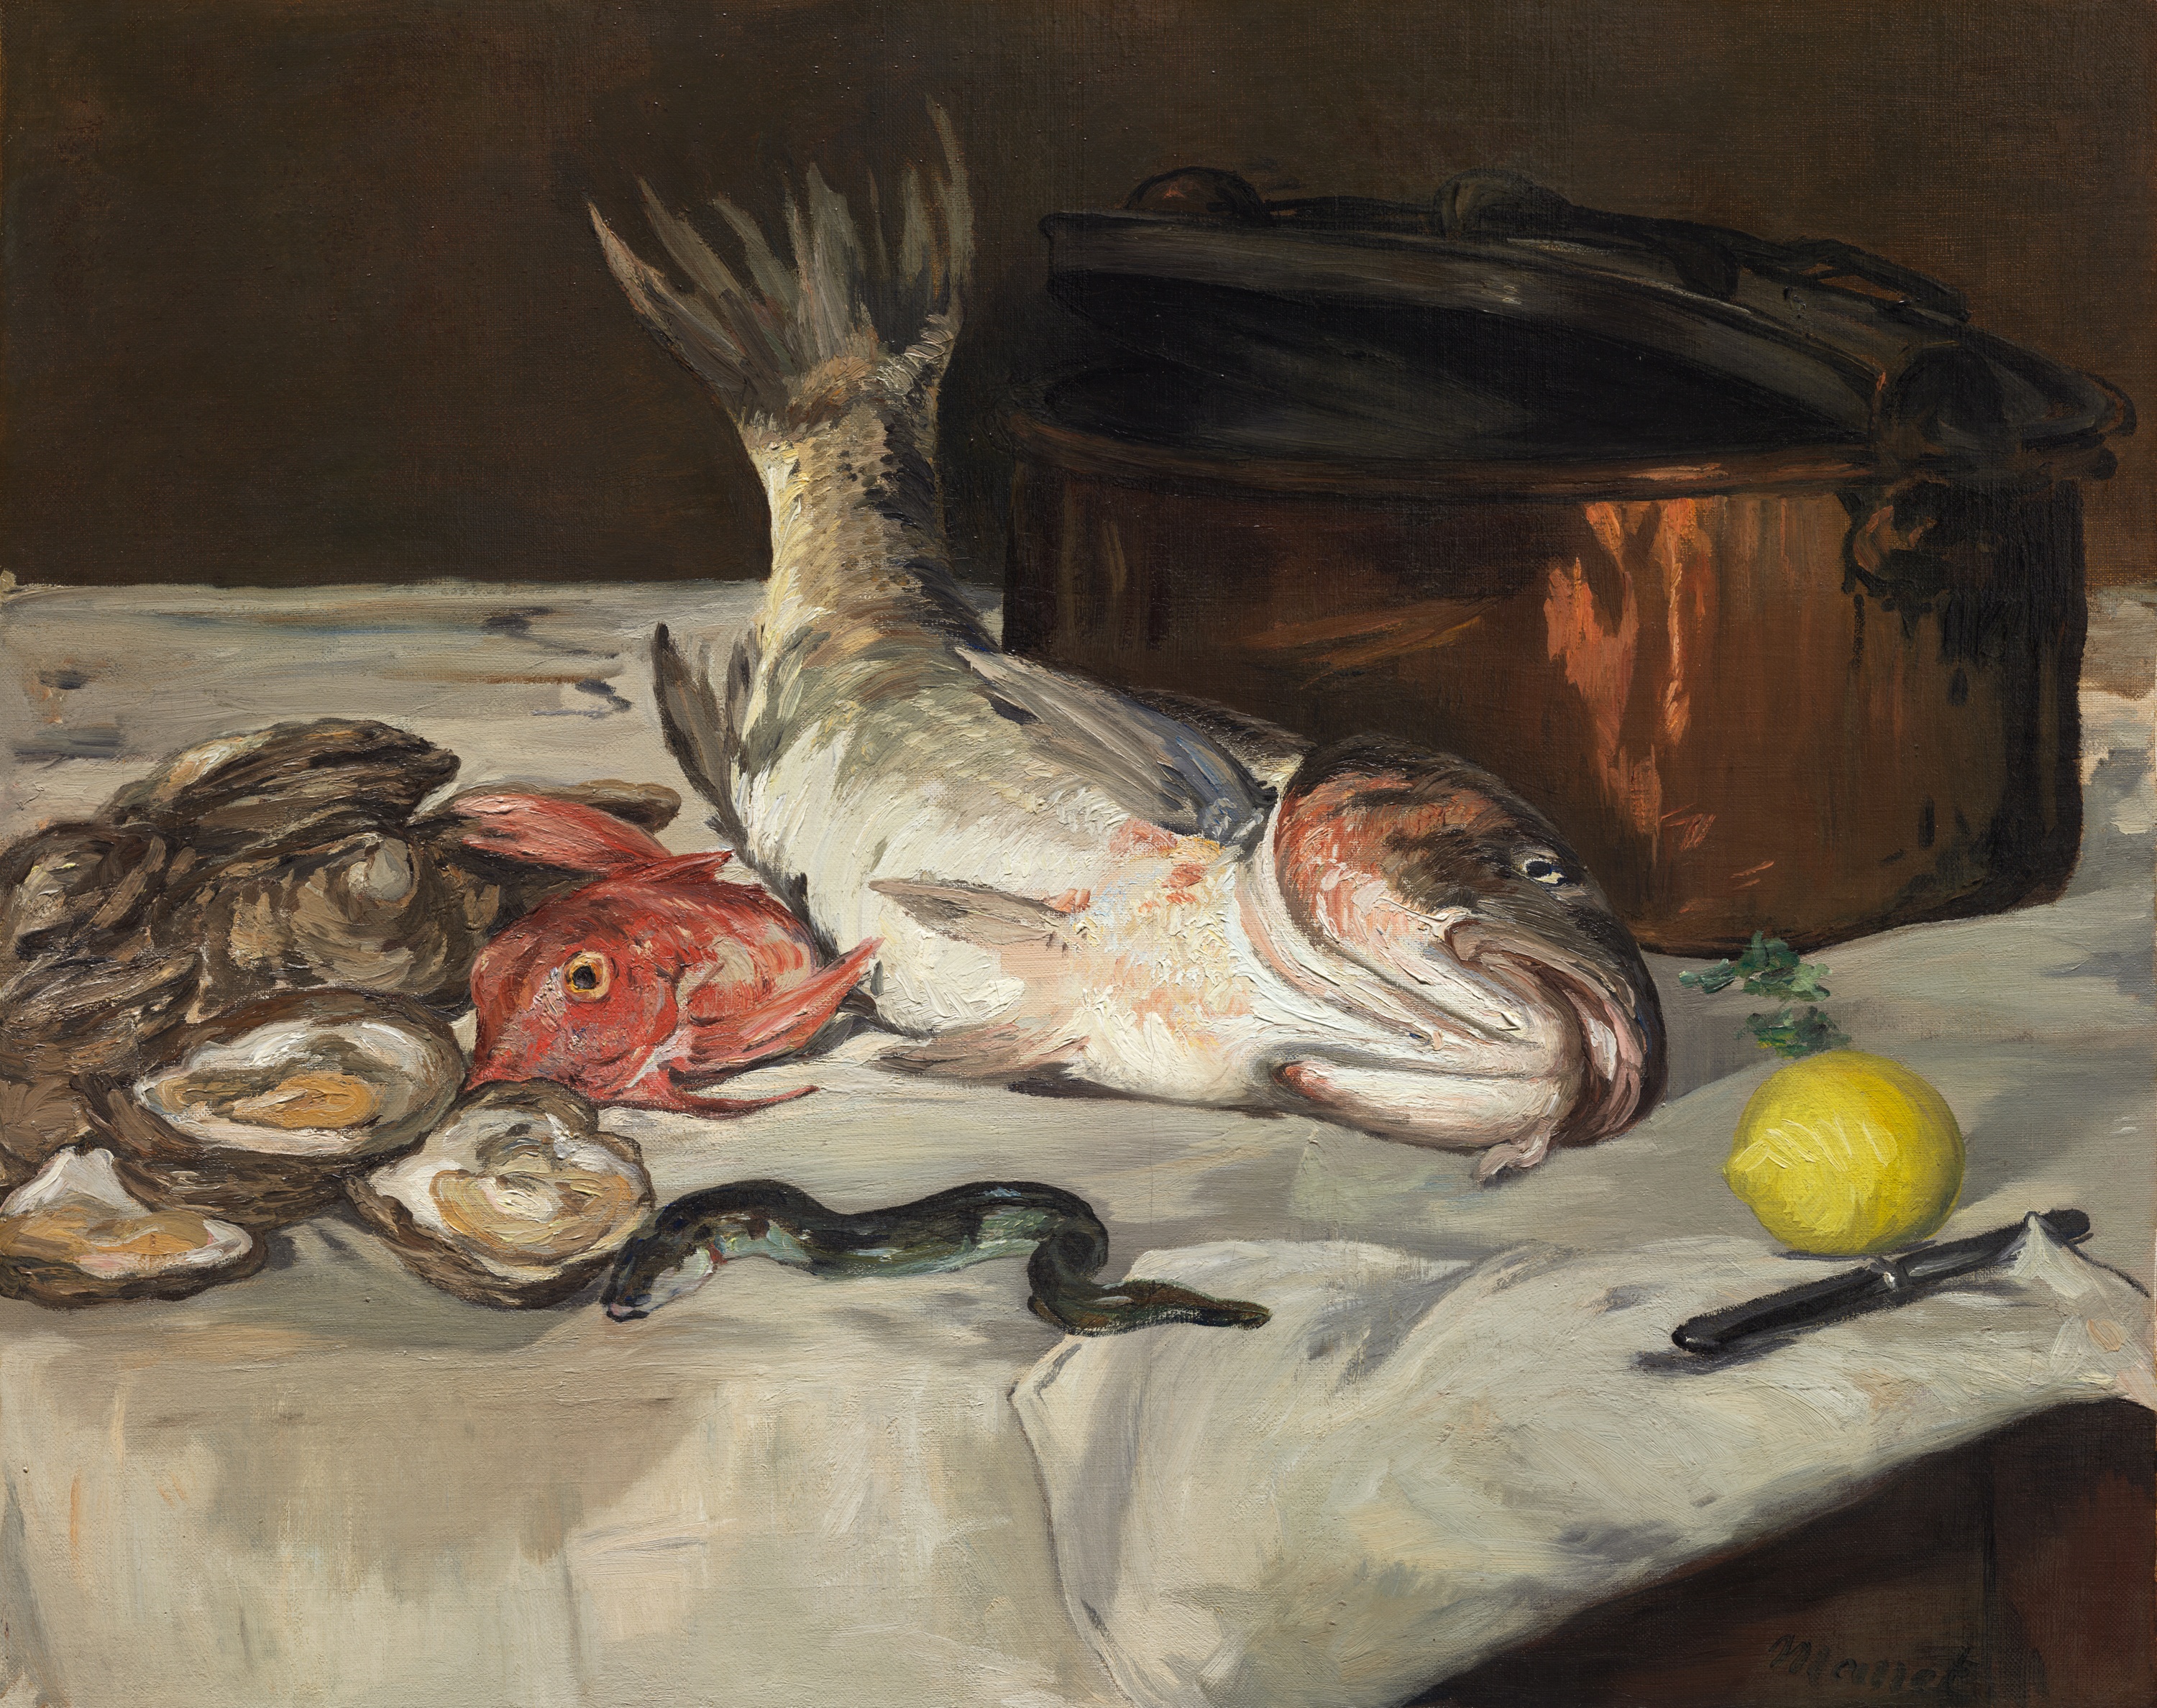 Fish (Still Life) by Édouard Manet - 1864 - 73.5 × 92.4 cm Art Institute of Chicago